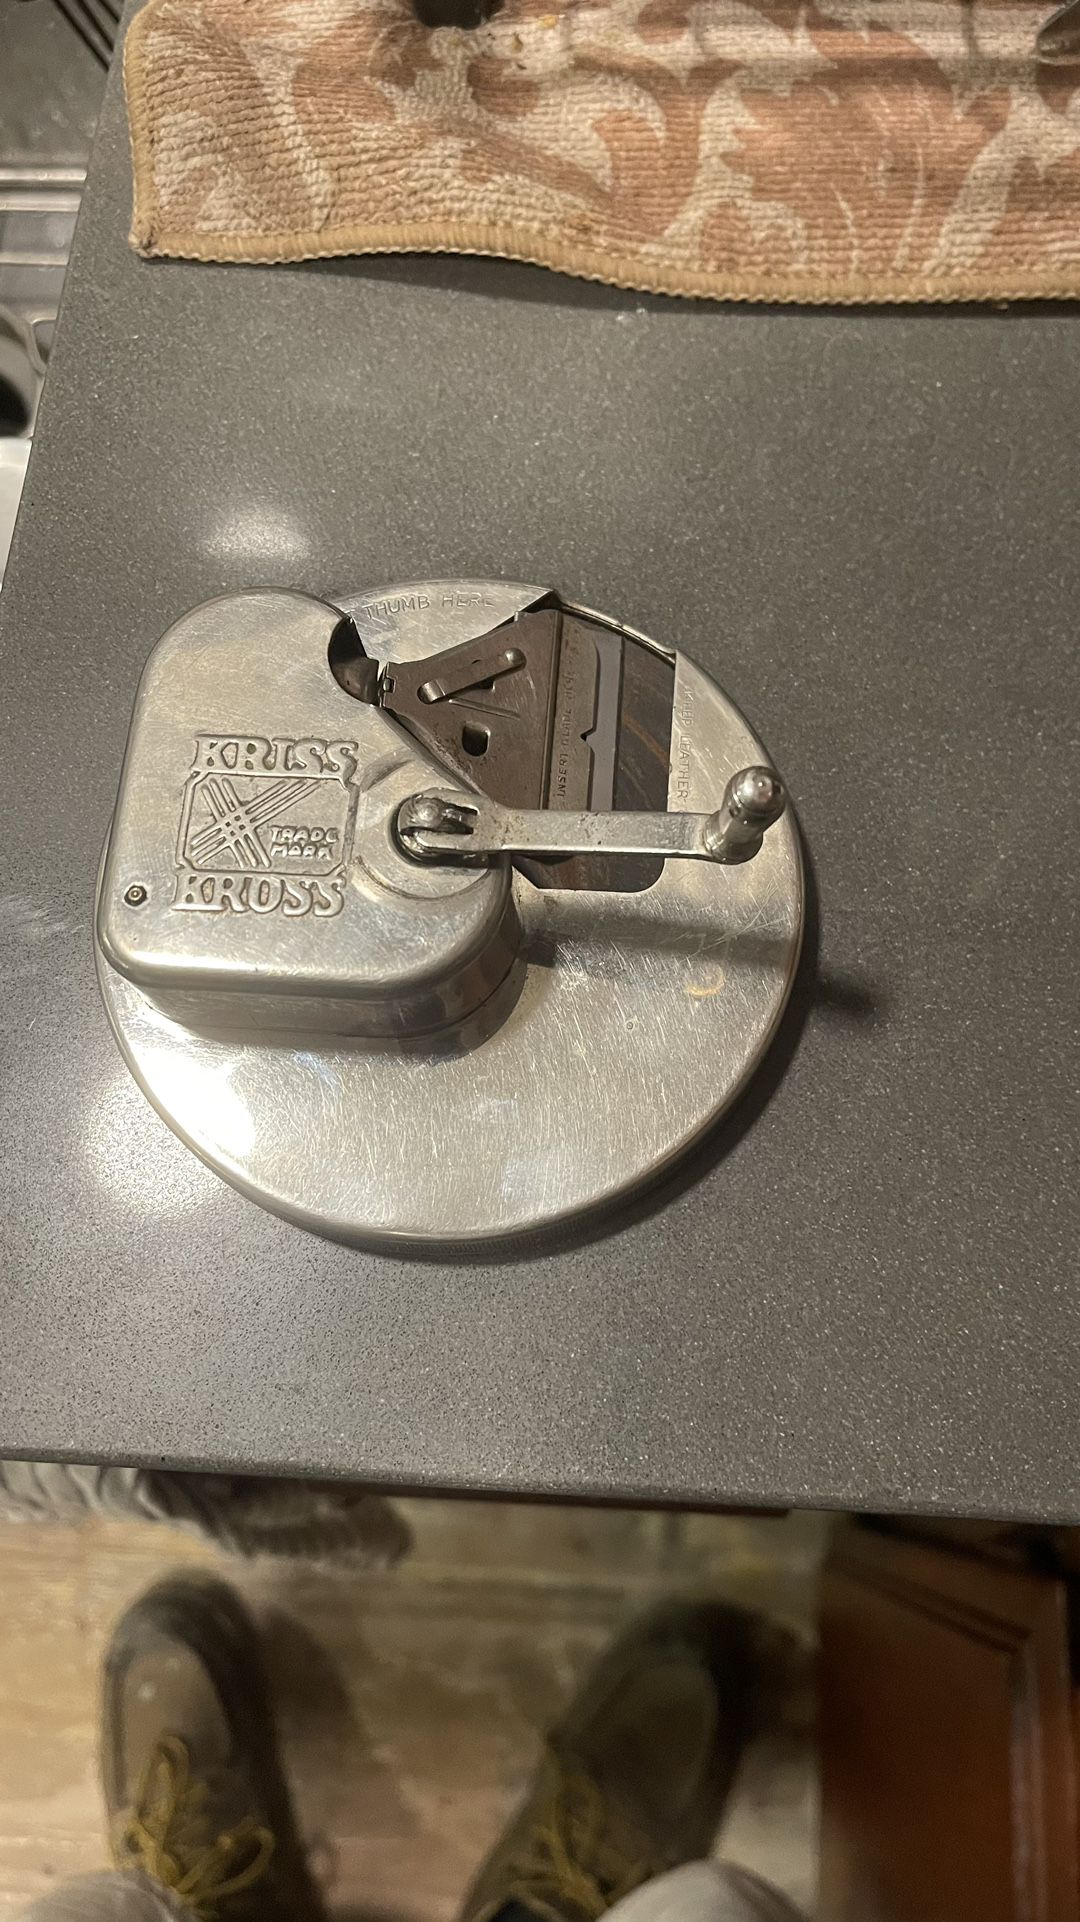 The Mining & Rollo Jamison Museums - Collections Corner: Kriss Kross Razor  Sharpener. This cast metal razor sharpener from the Kriss Kross Corp. is  complete with a hand-crank operated leather belt and